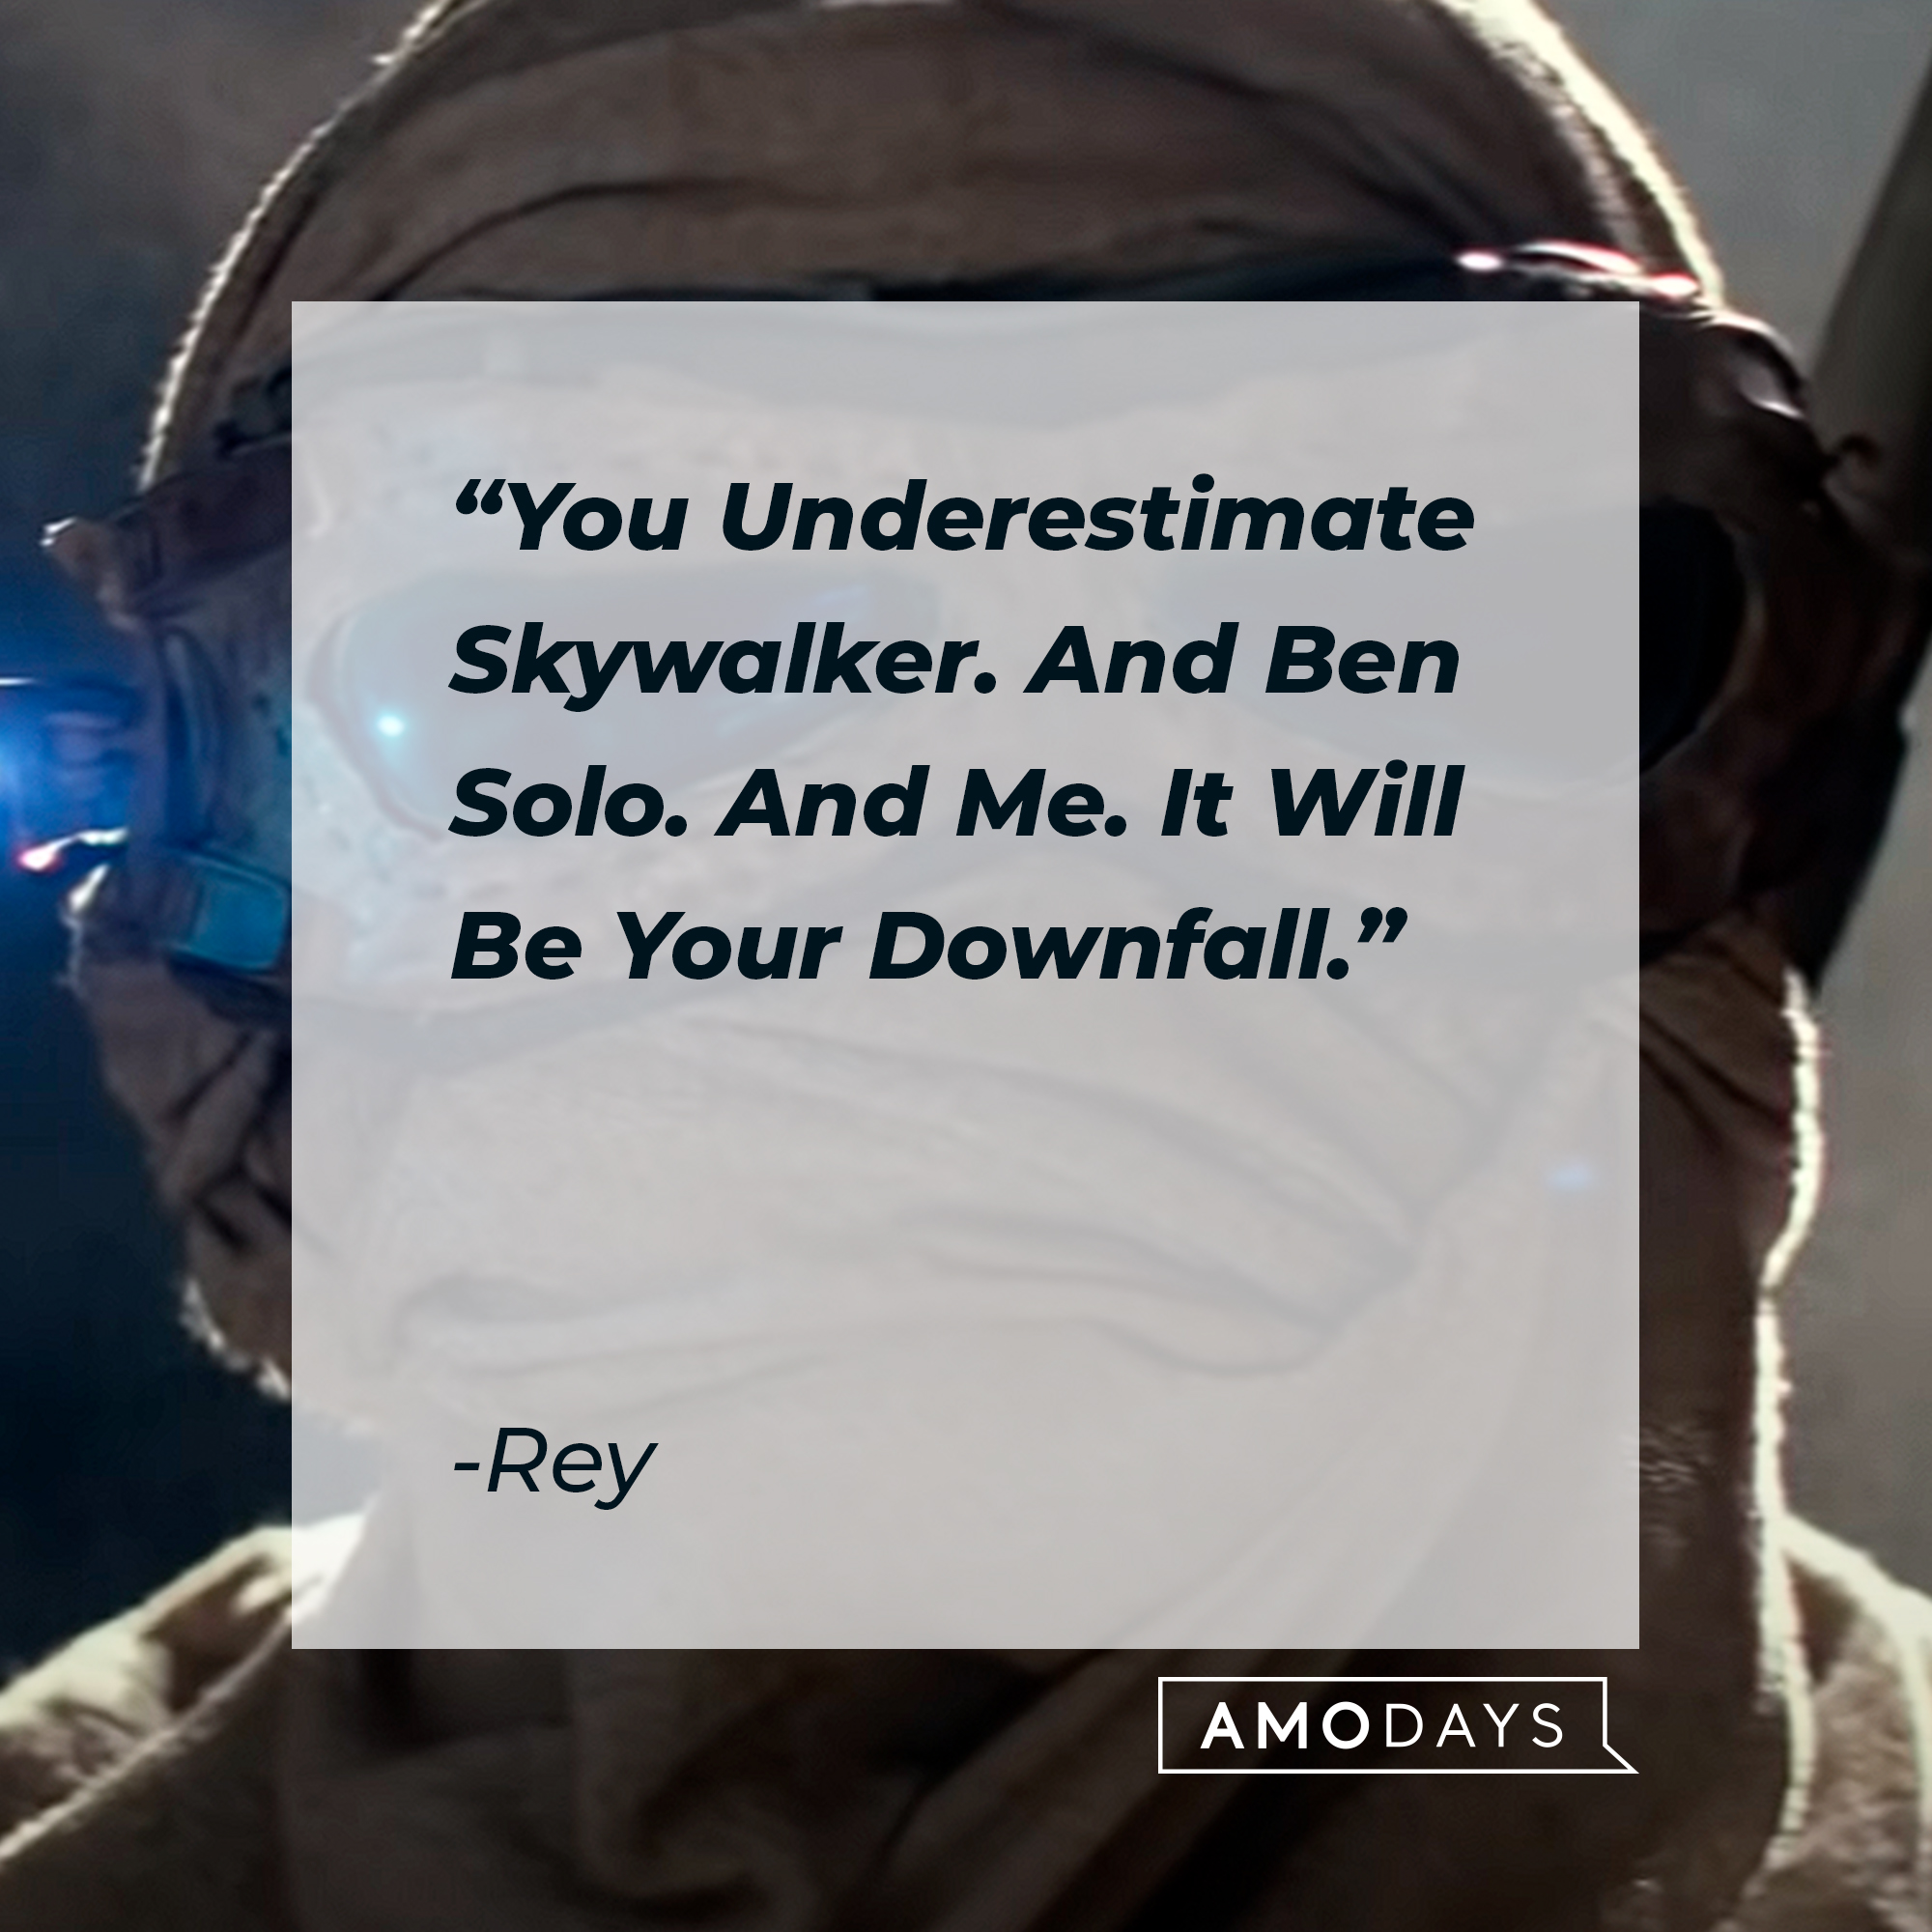 Rey's quote: "You Underestimate Skywalker. And Ben Solo. And Me. It Will Be Your Downfall."┃Source: youtube.com/StarWars